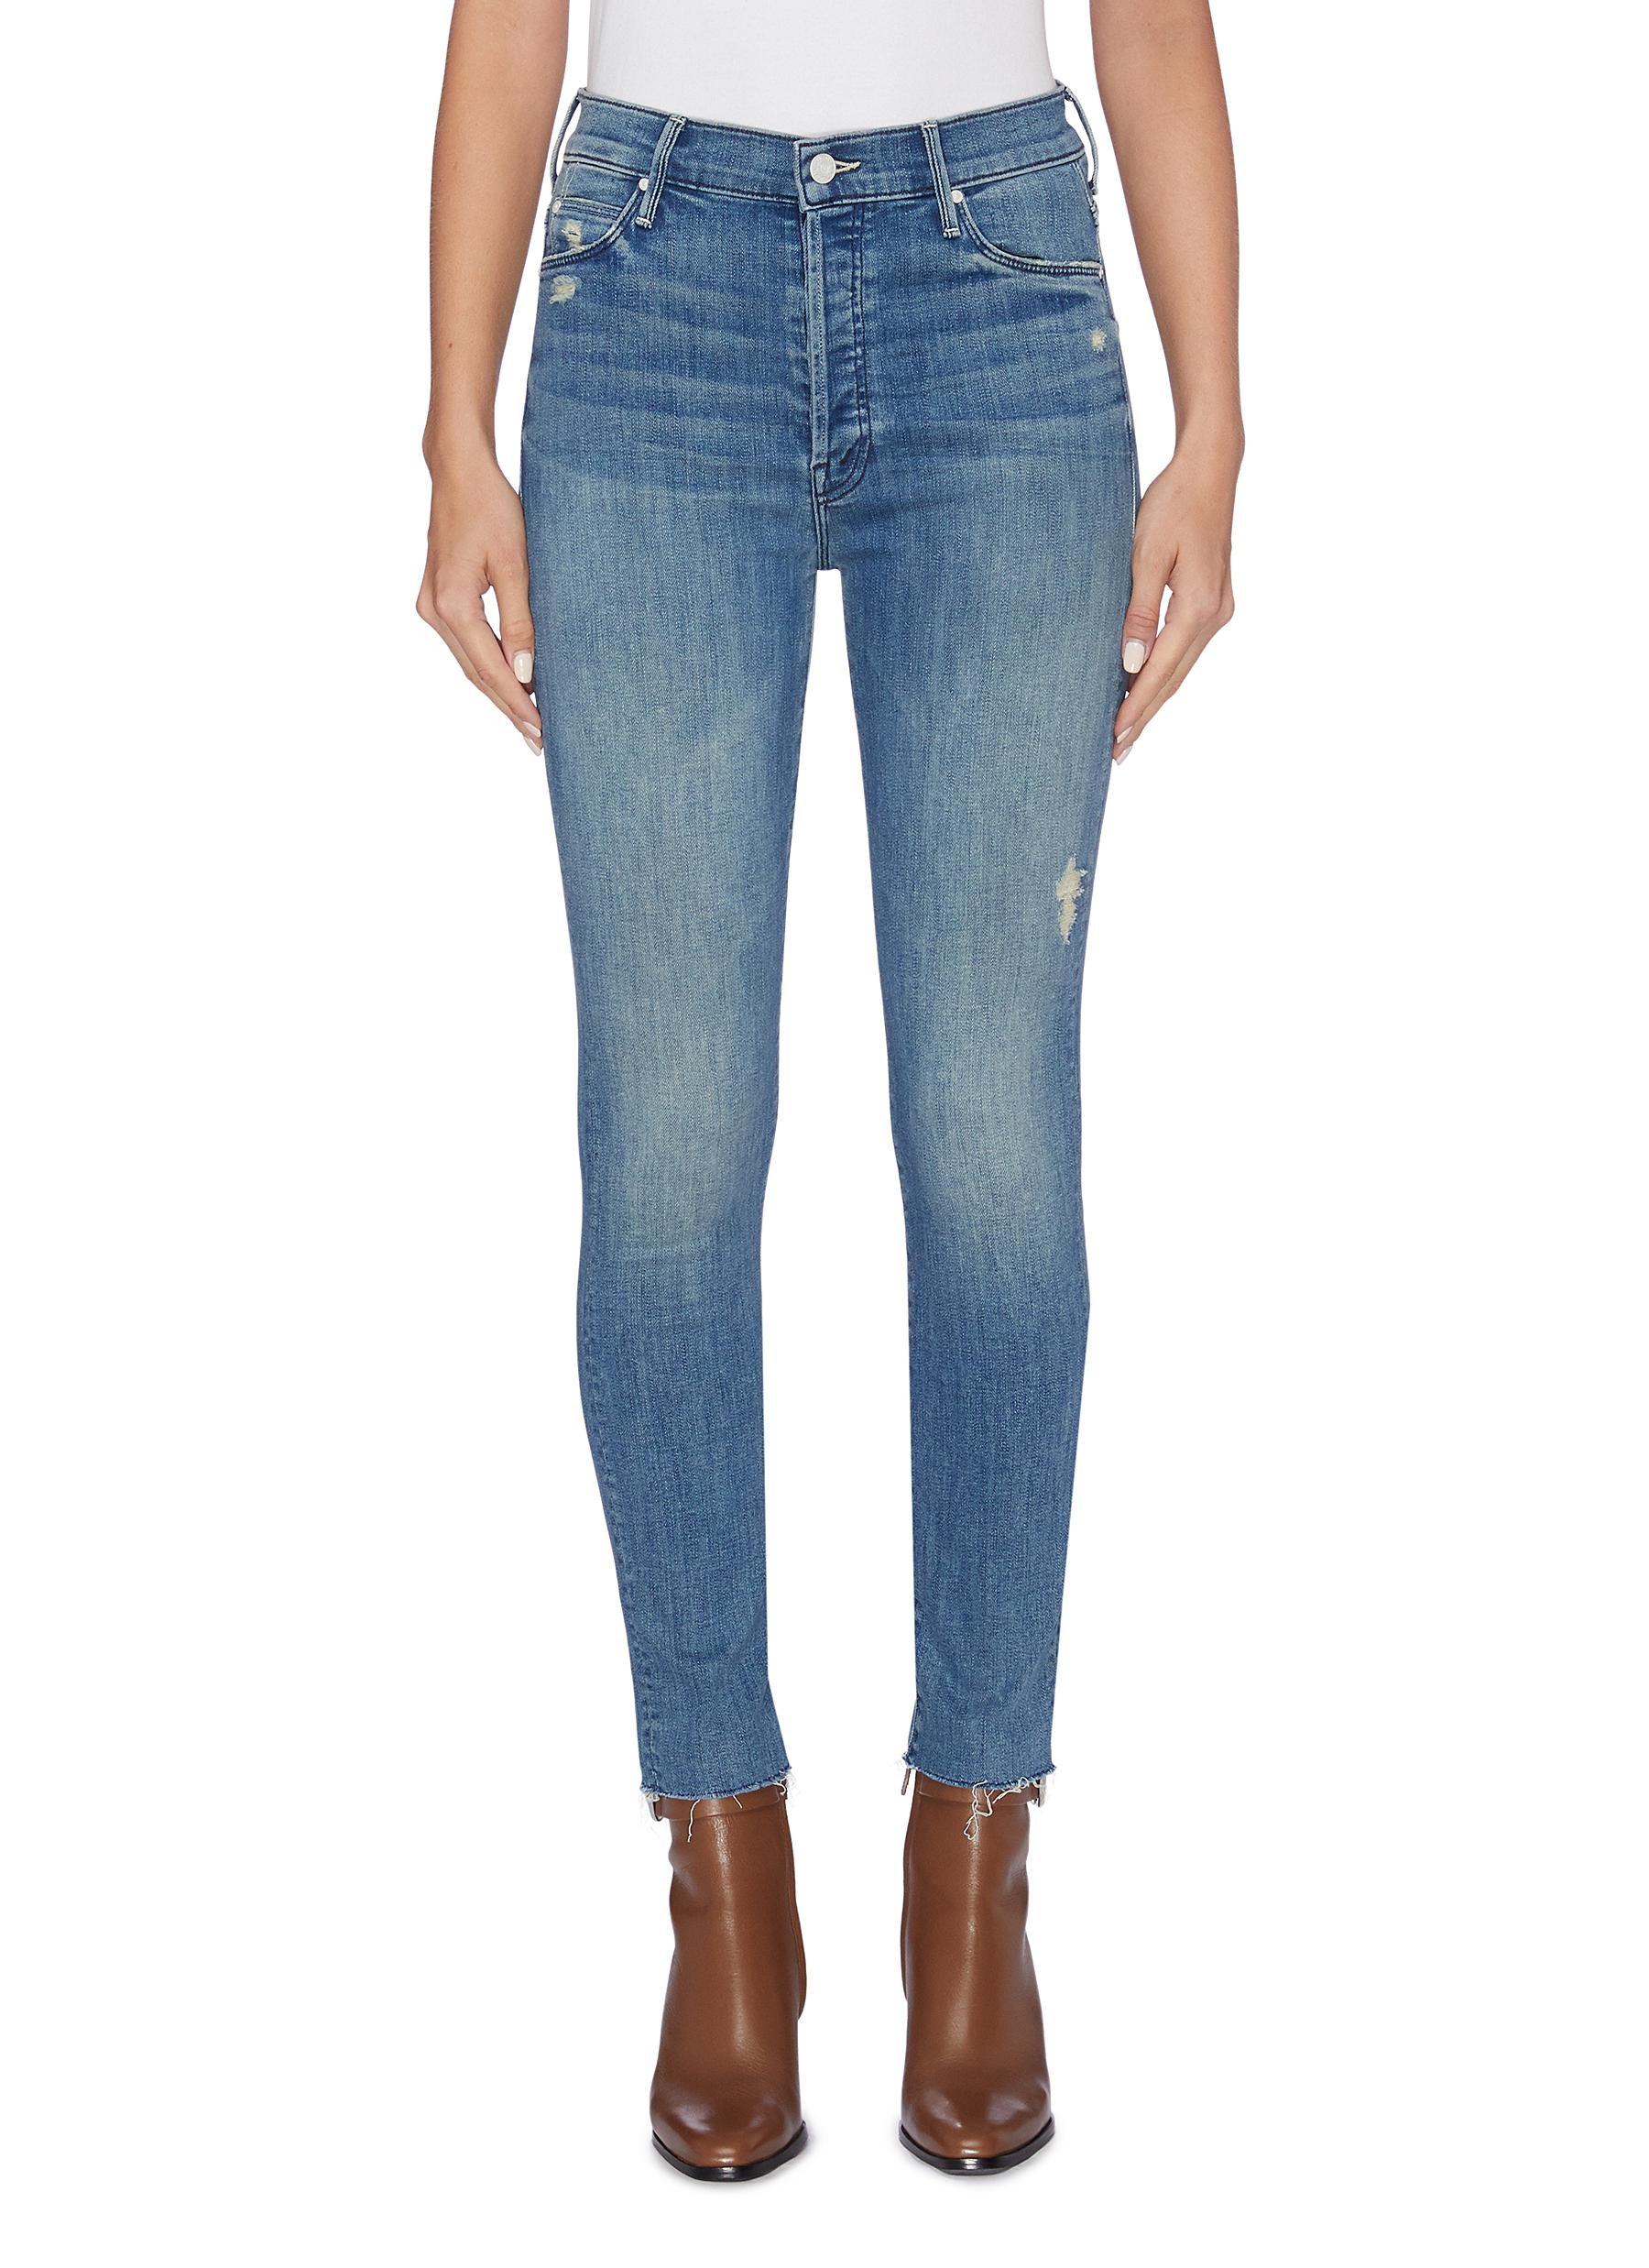 The Stunner Ankle Fray skinny jeans by Mother